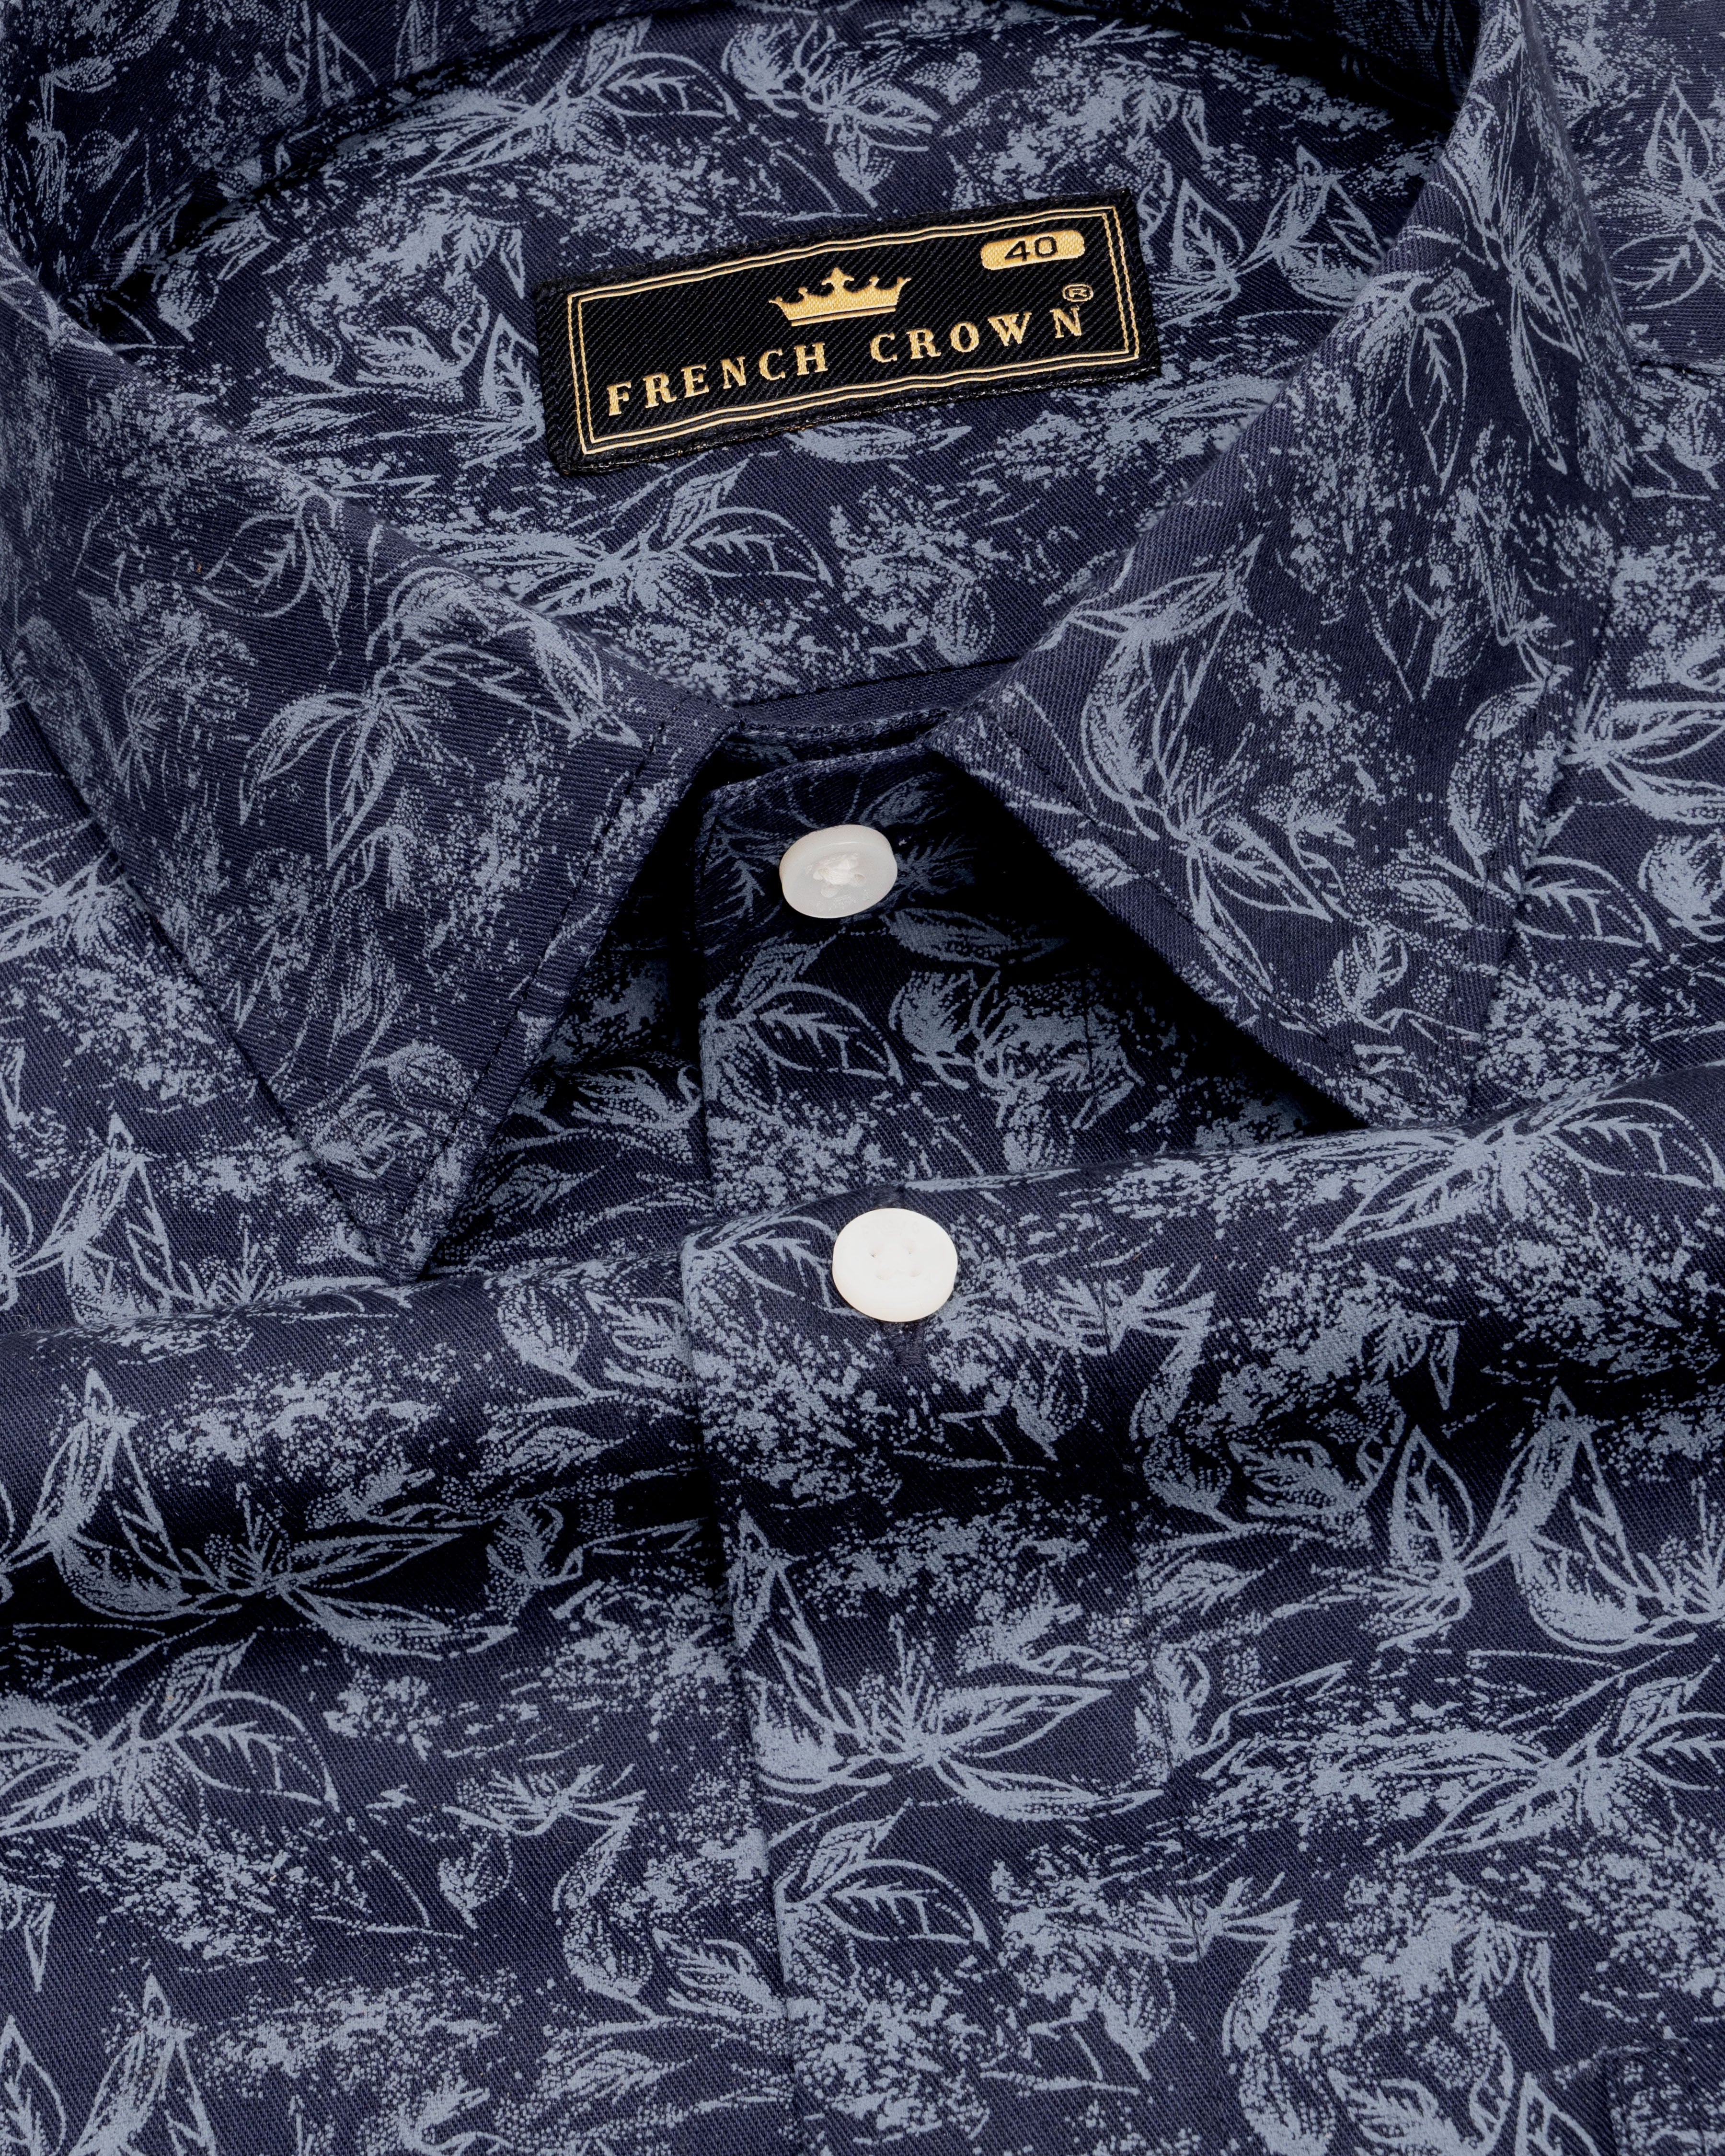 Martinique Blue with Amethyst Smoke Gray Floral Printed Twill Premium Cotton Shirt